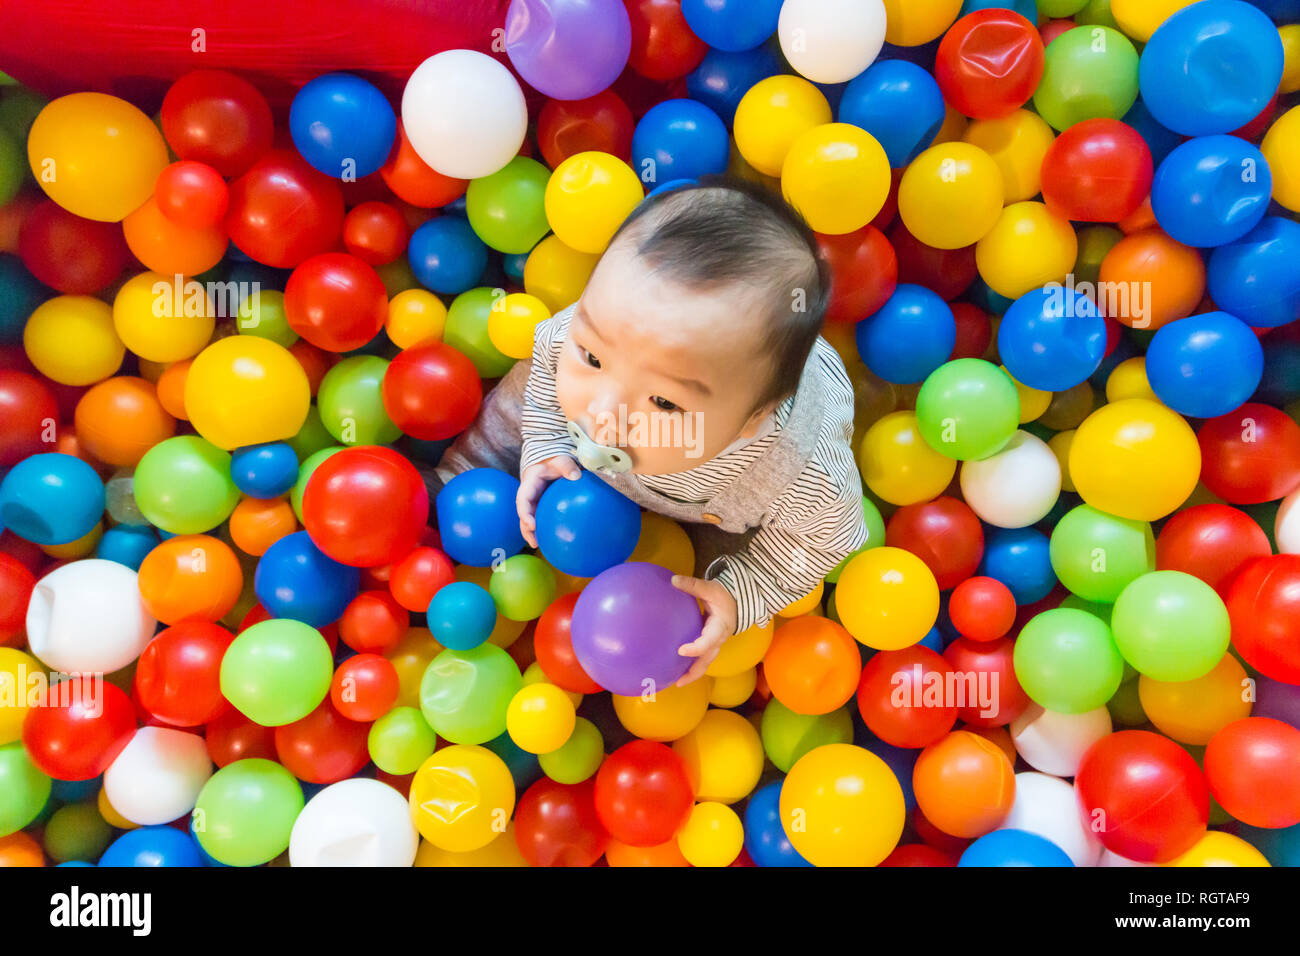 baby pool ball pit